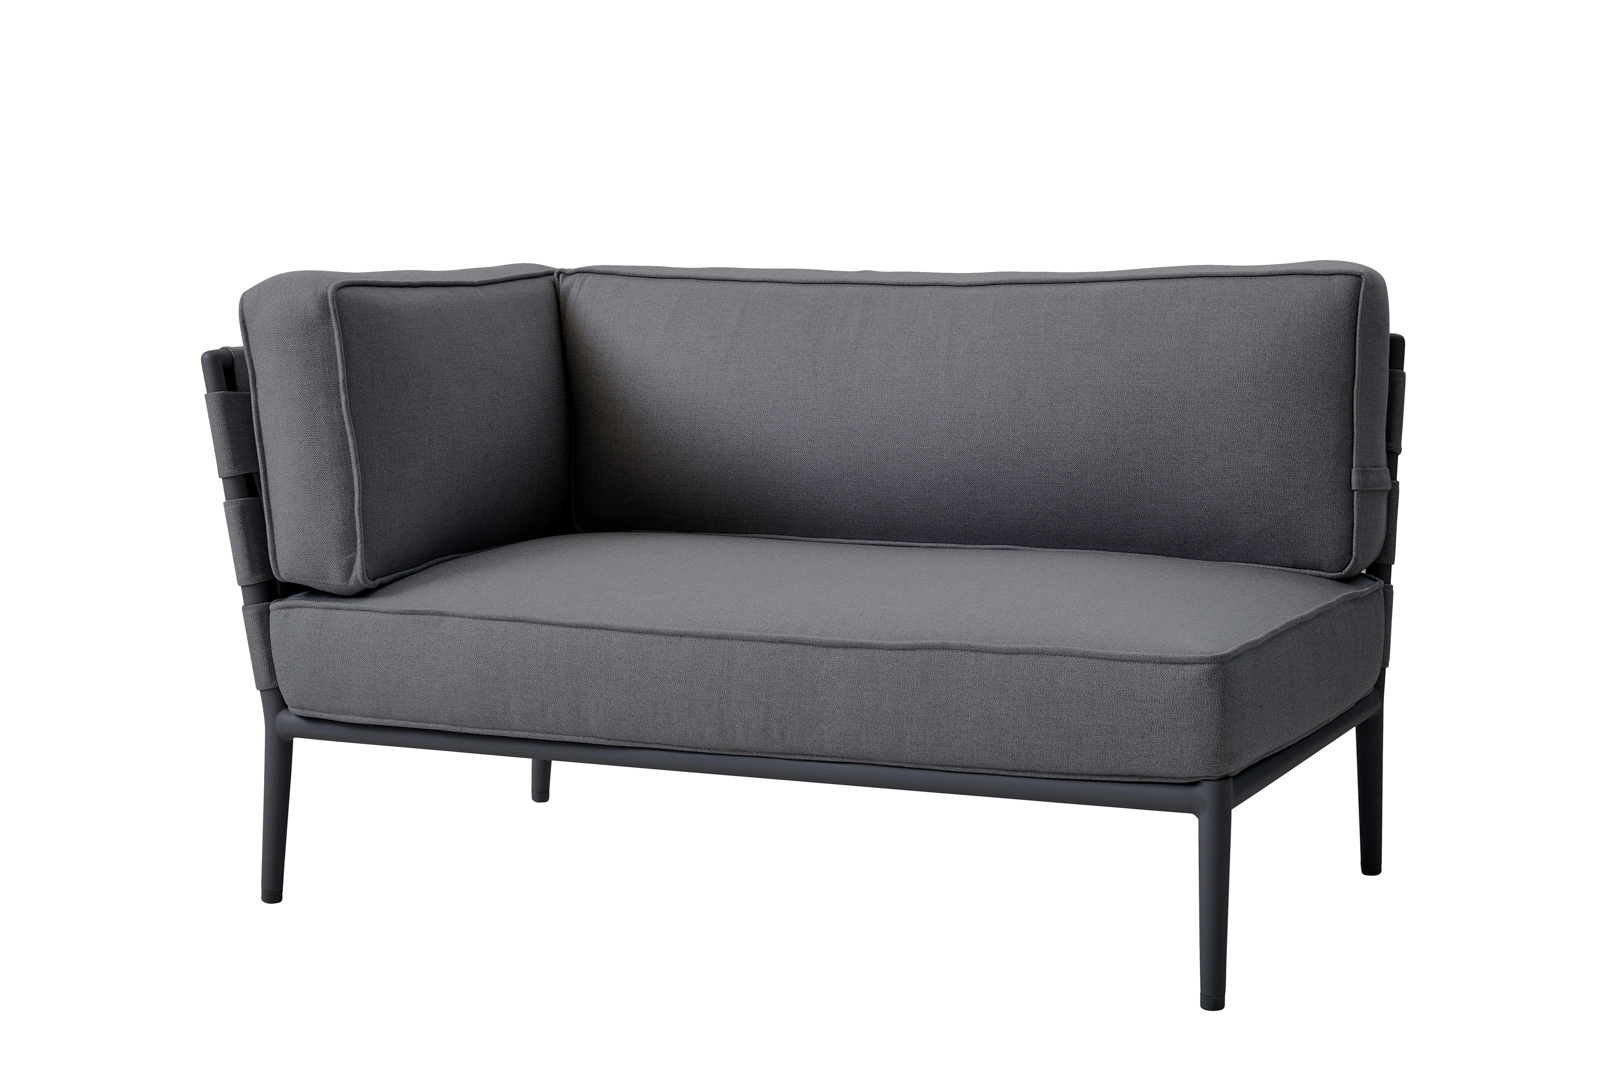 Cane-line Conic | Modulsofa, Rechts AirTouch | Grey